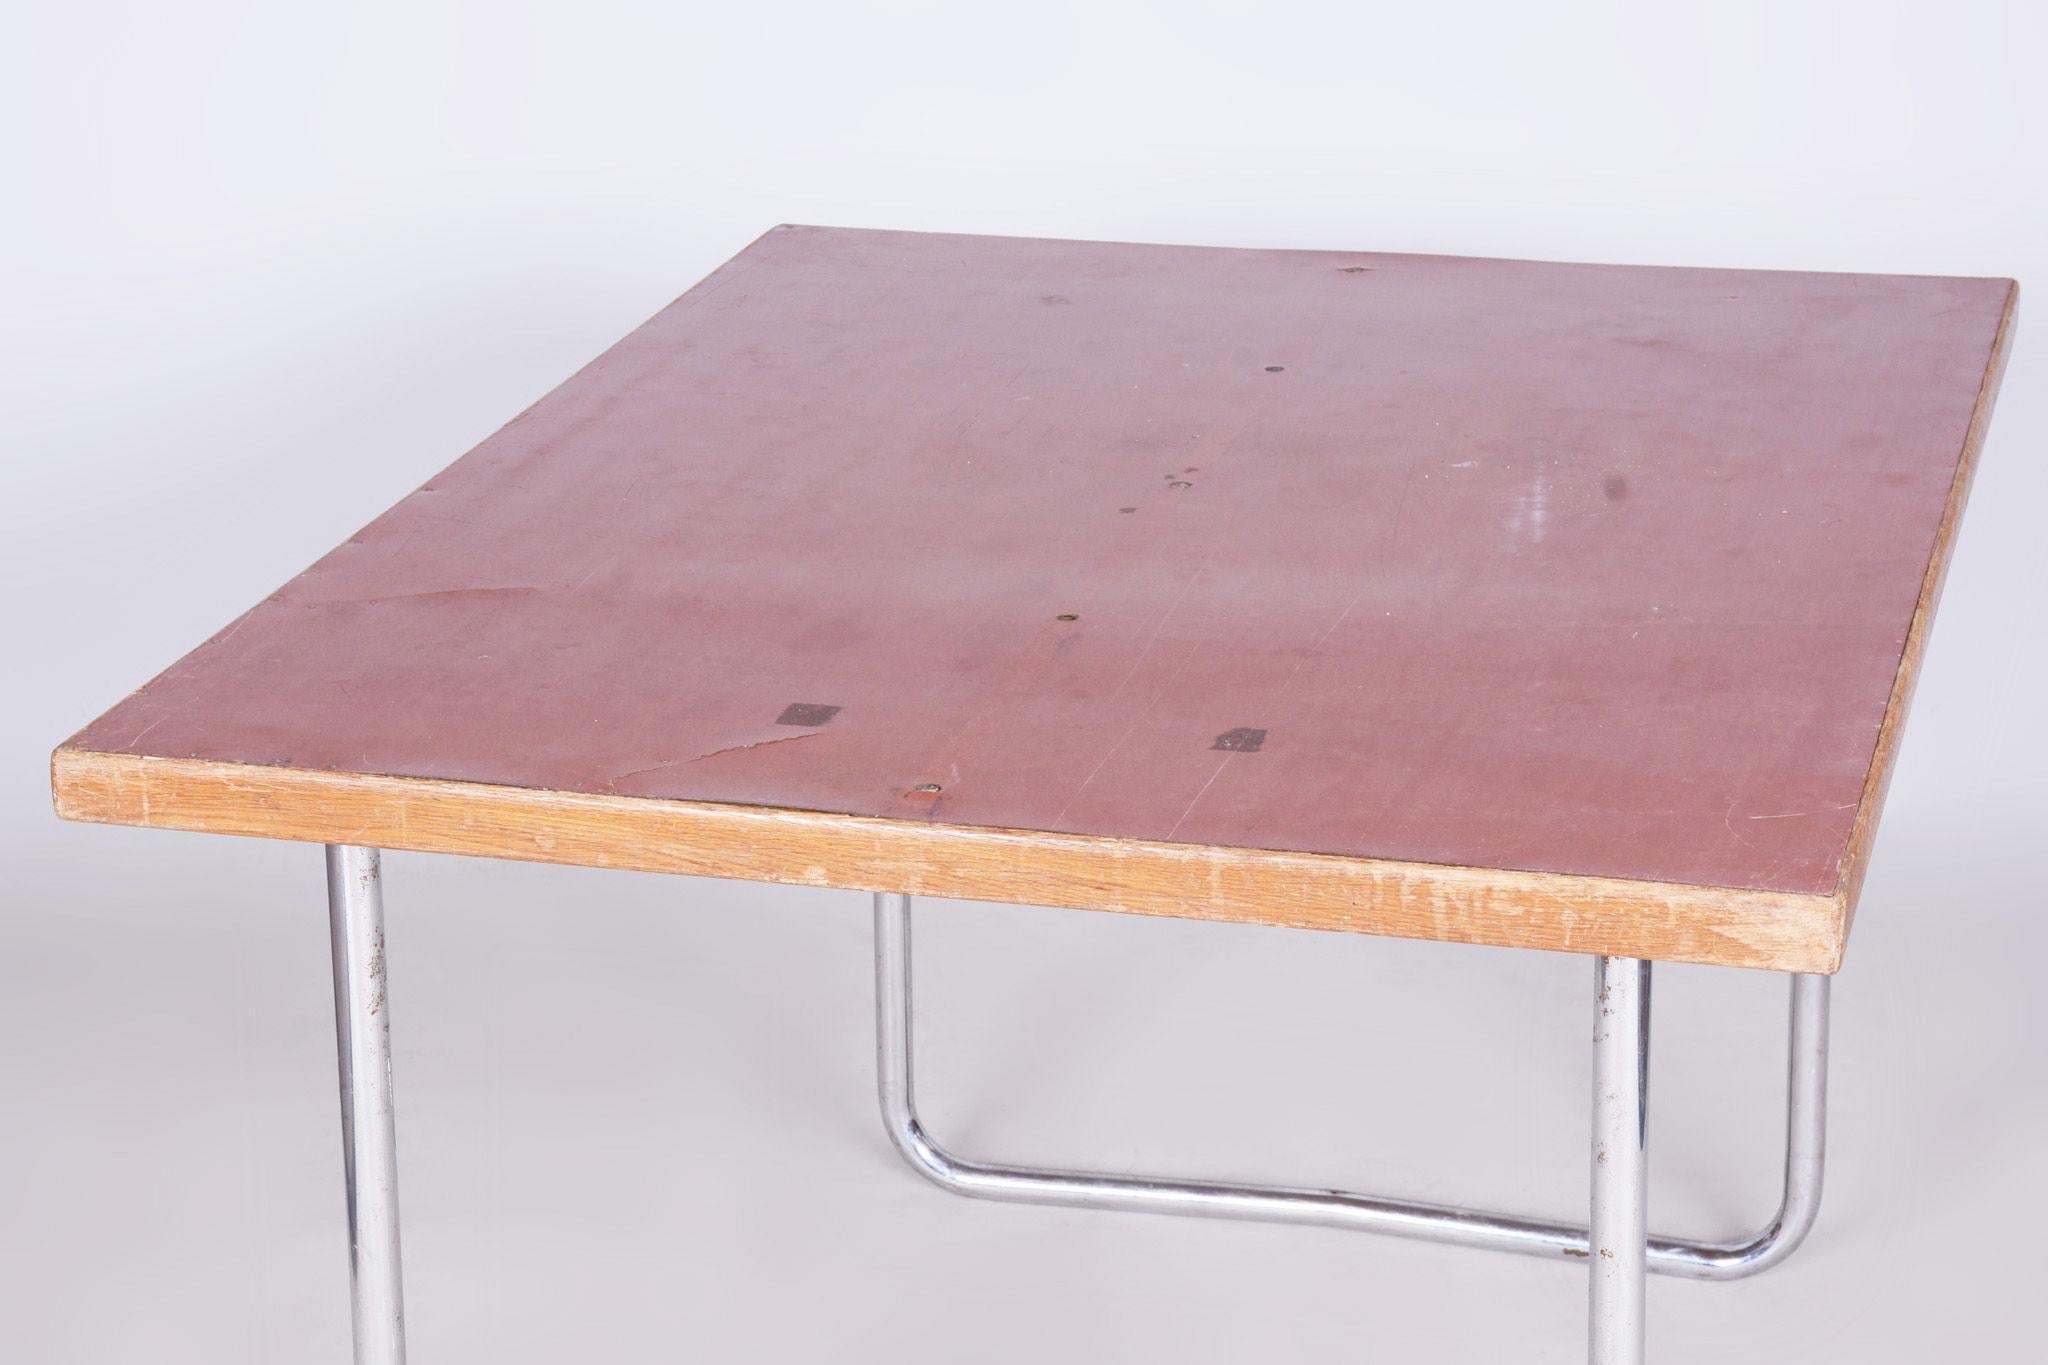 Spruce Original Bauhaus Dining Table, by Mücke - Melder, Well Preserved, Czech, 1930s For Sale